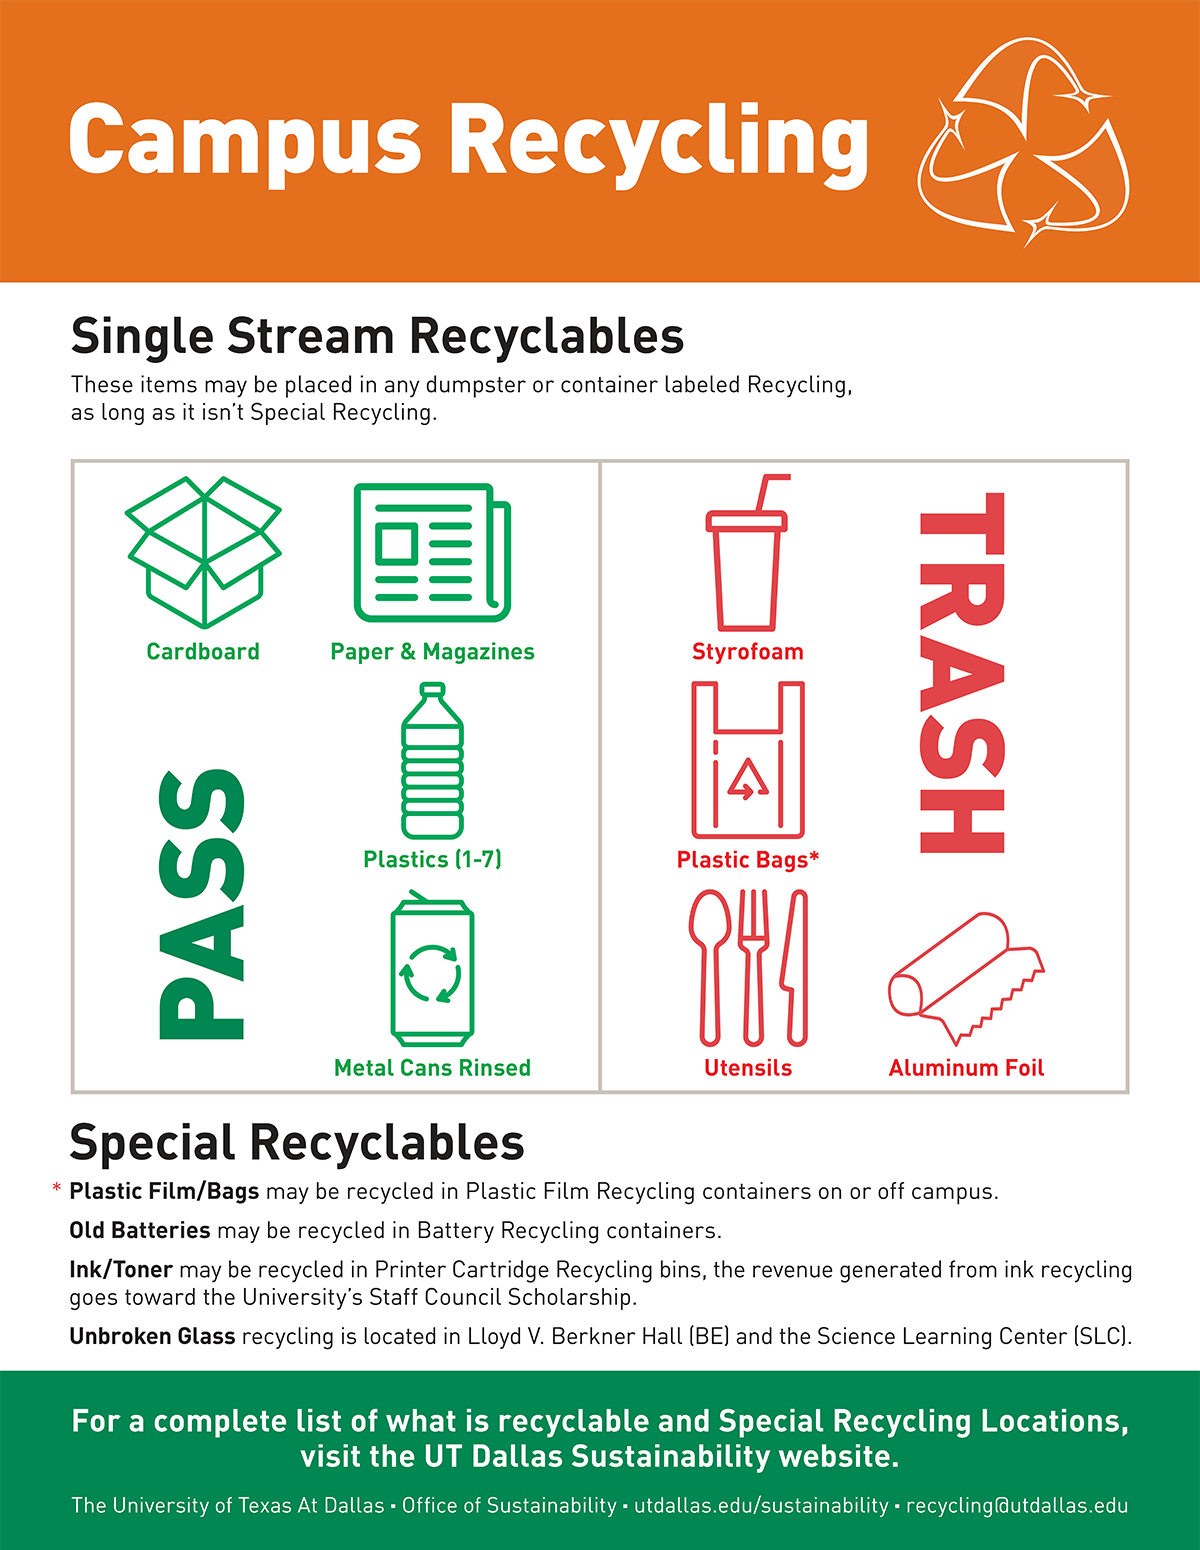 Campus Recycling - What Can Be Recycled - Download the Full-Size List